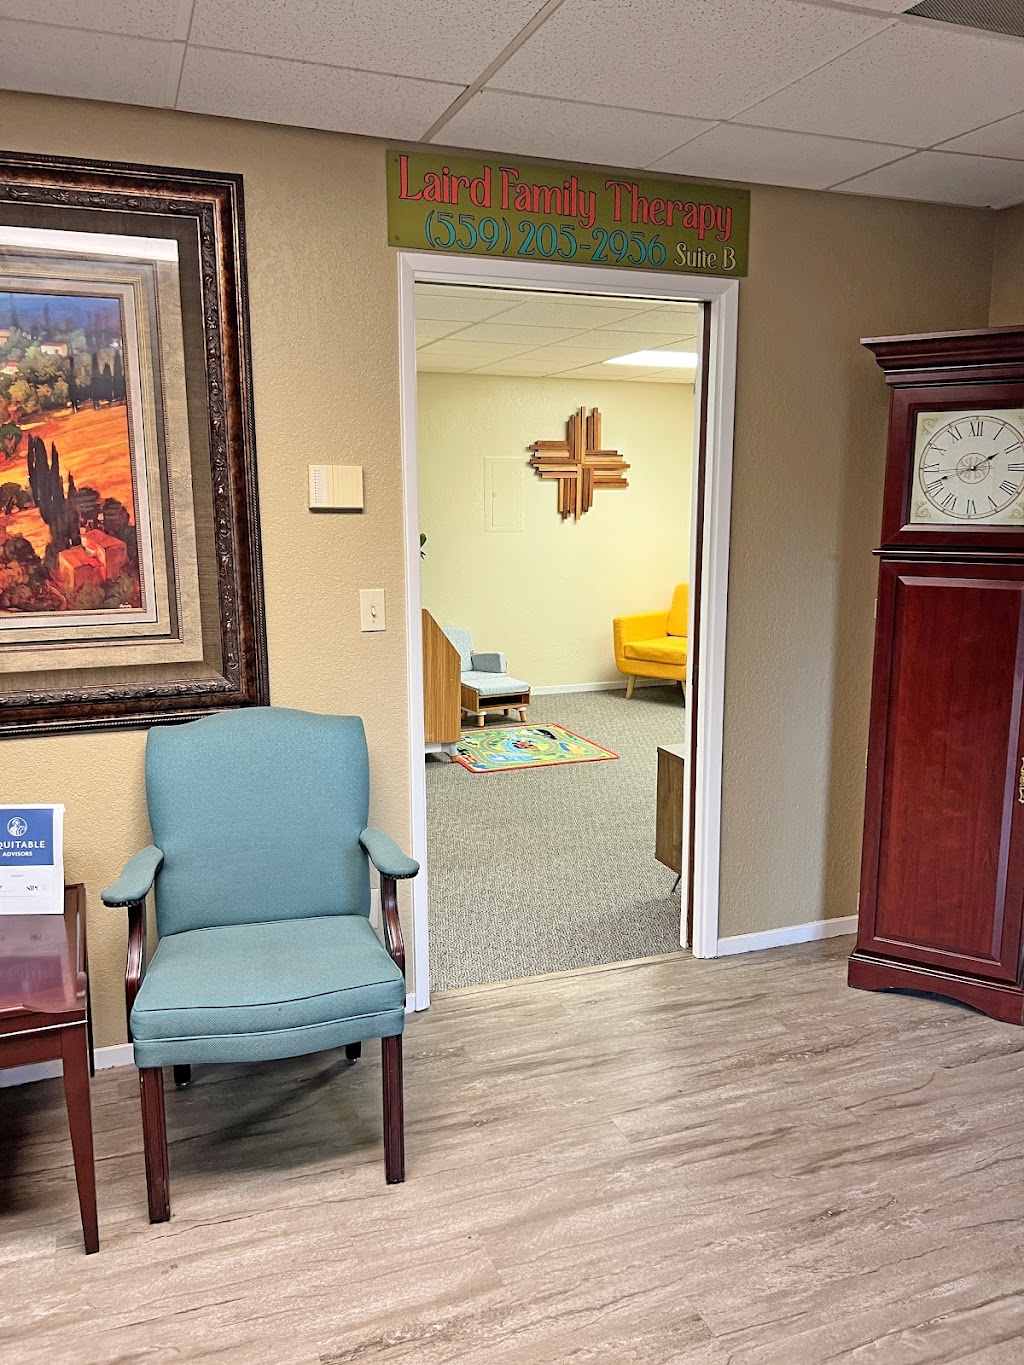 Laird Family Therapy -Therapist In Visalia, CA | 1606 W Mineral King Ave b, Visalia, CA 93291, USA | Phone: (559) 205-2956